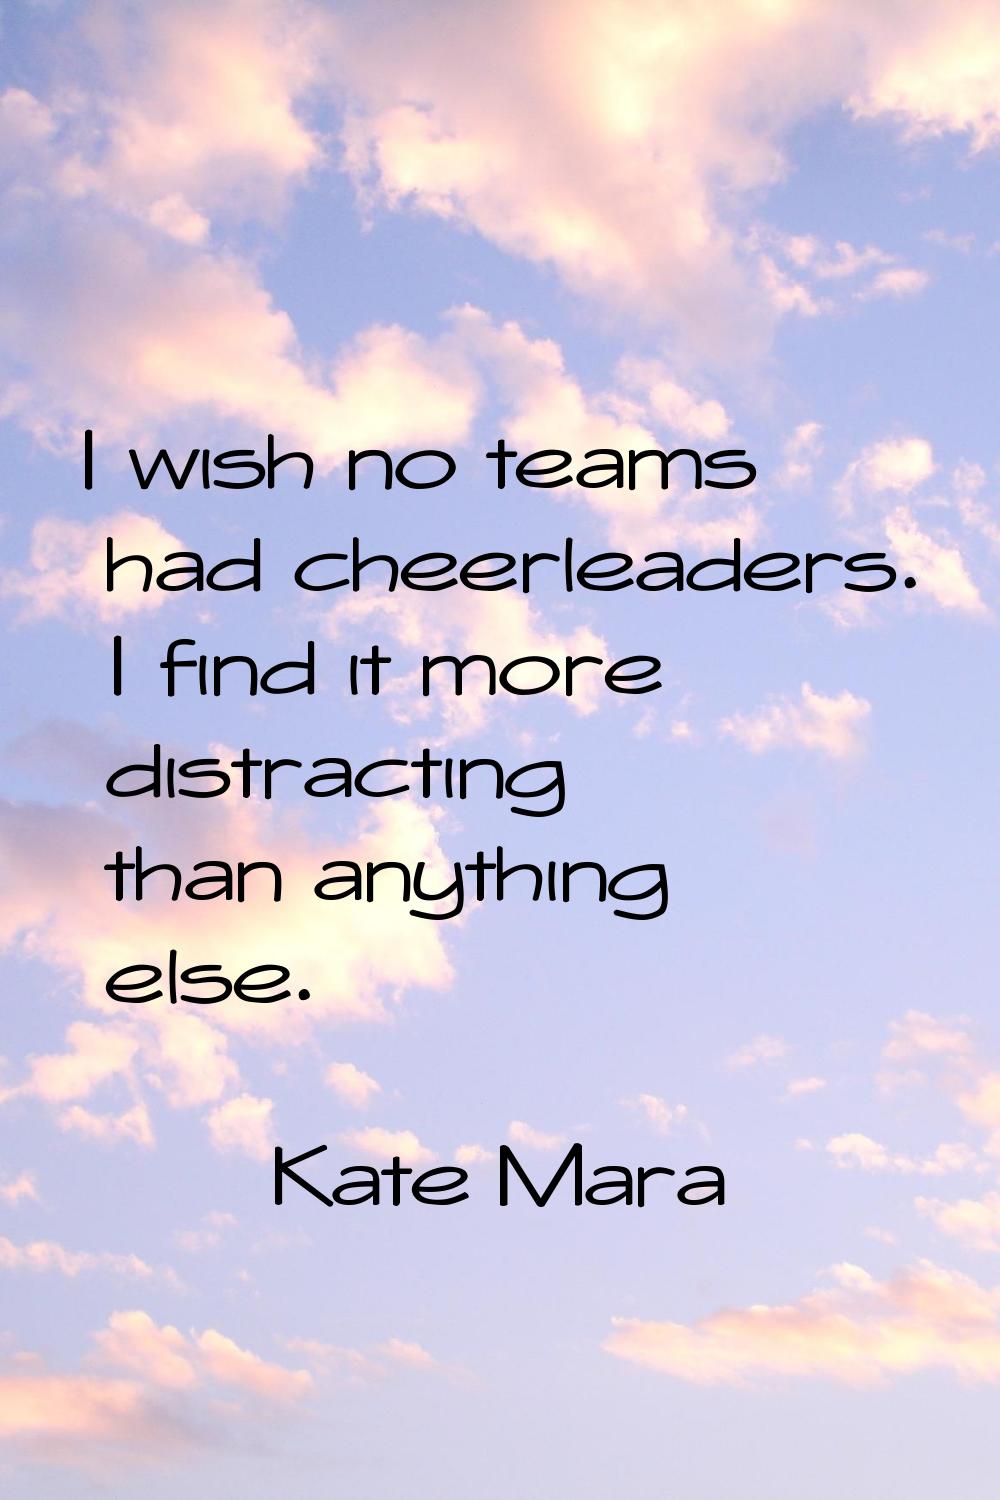 I wish no teams had cheerleaders. I find it more distracting than anything else.